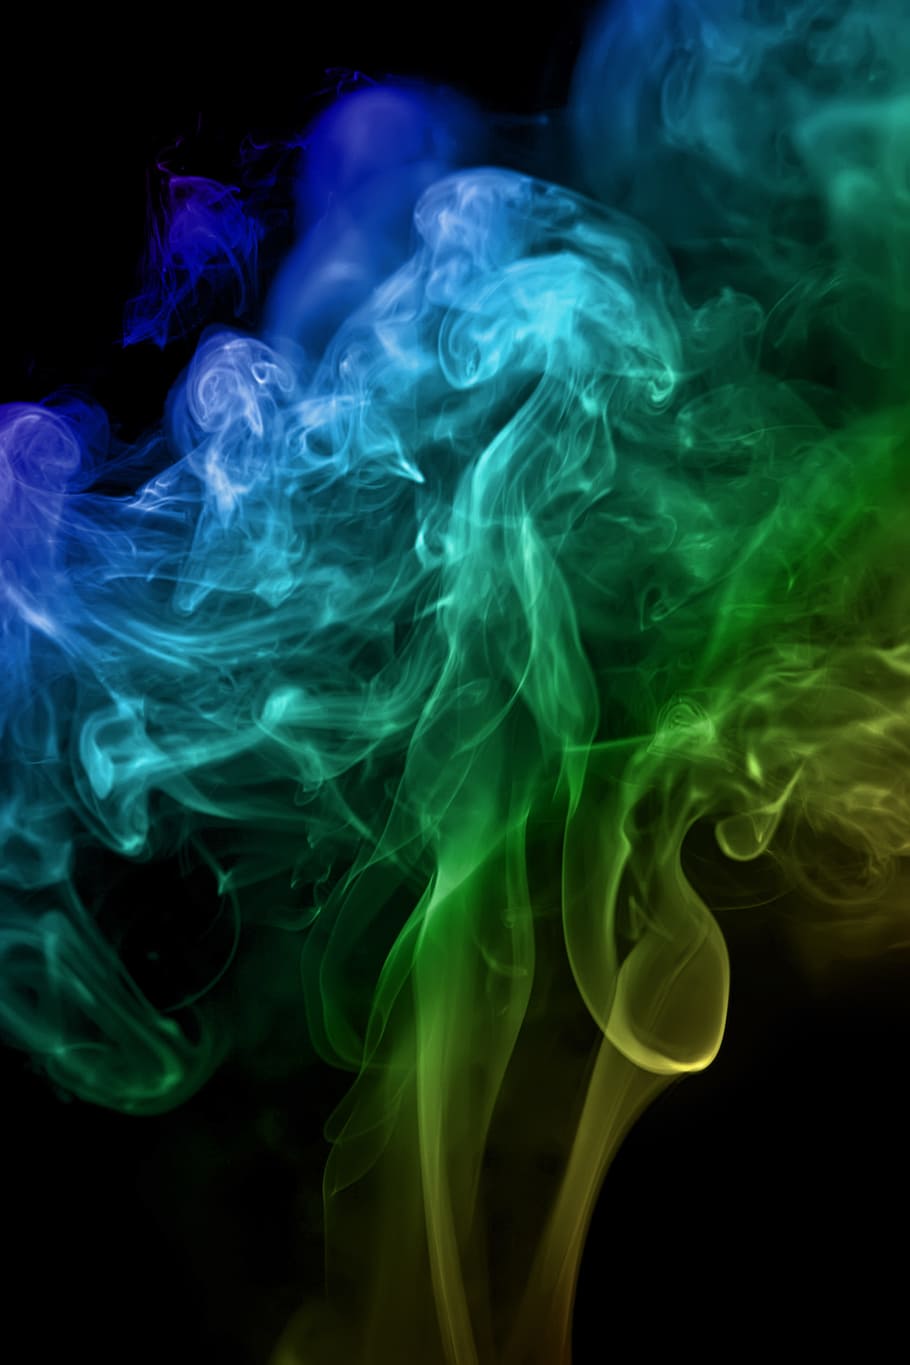 smoke, smell, color, aroma, abstract, background, aromatherapy, smoke - physical structure, studio shot, black background